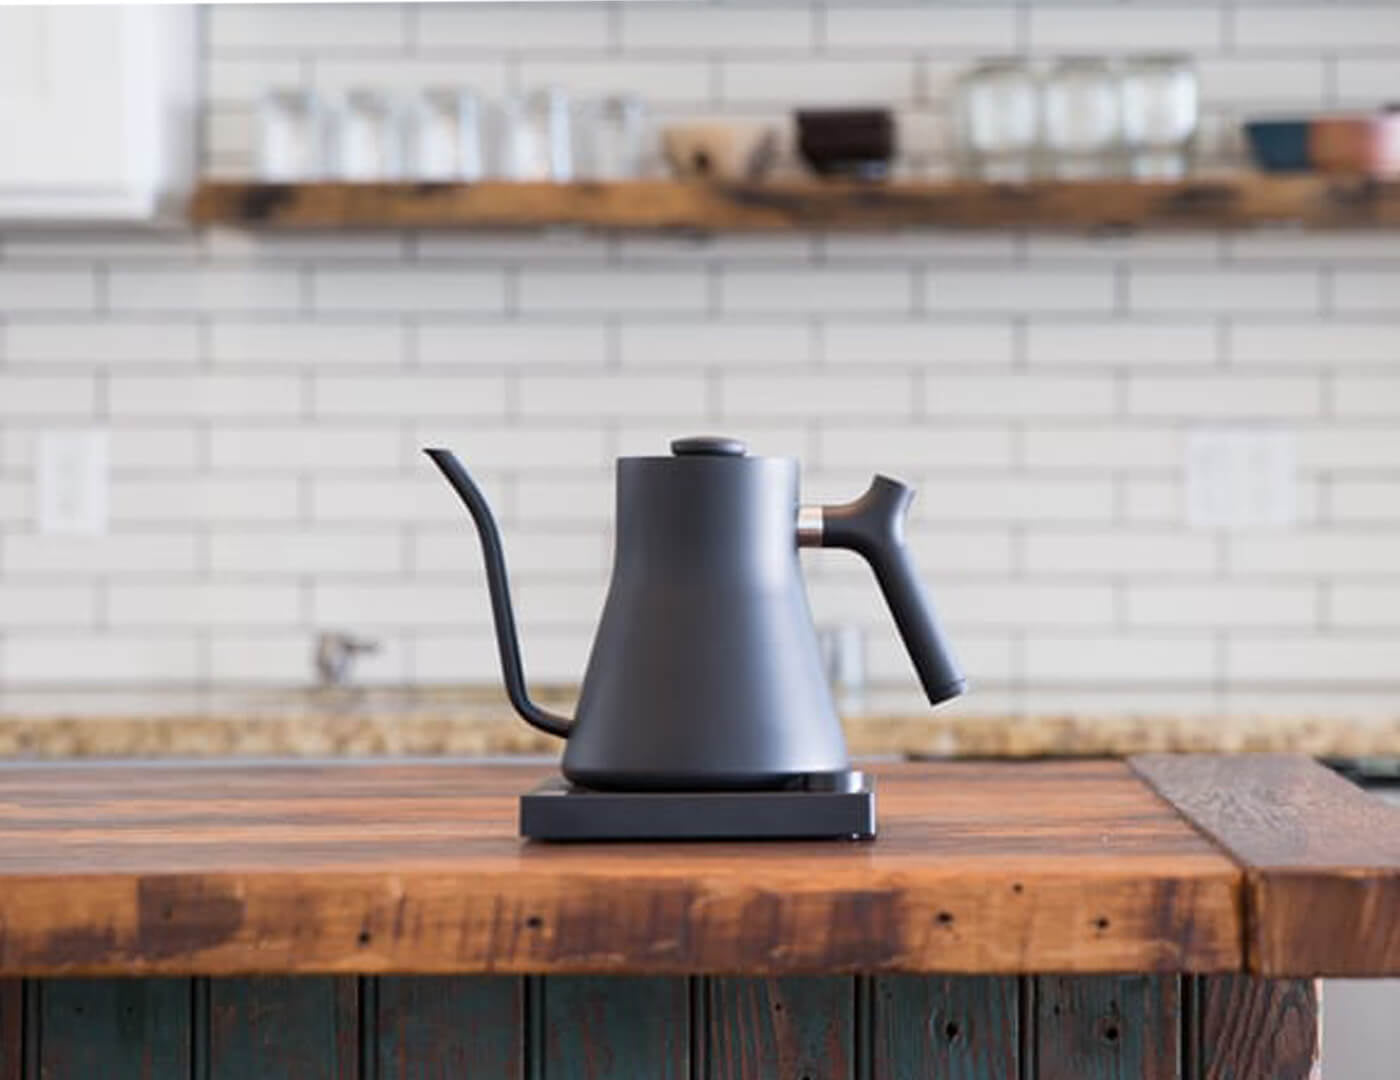 Stagg electric kettle in black on table